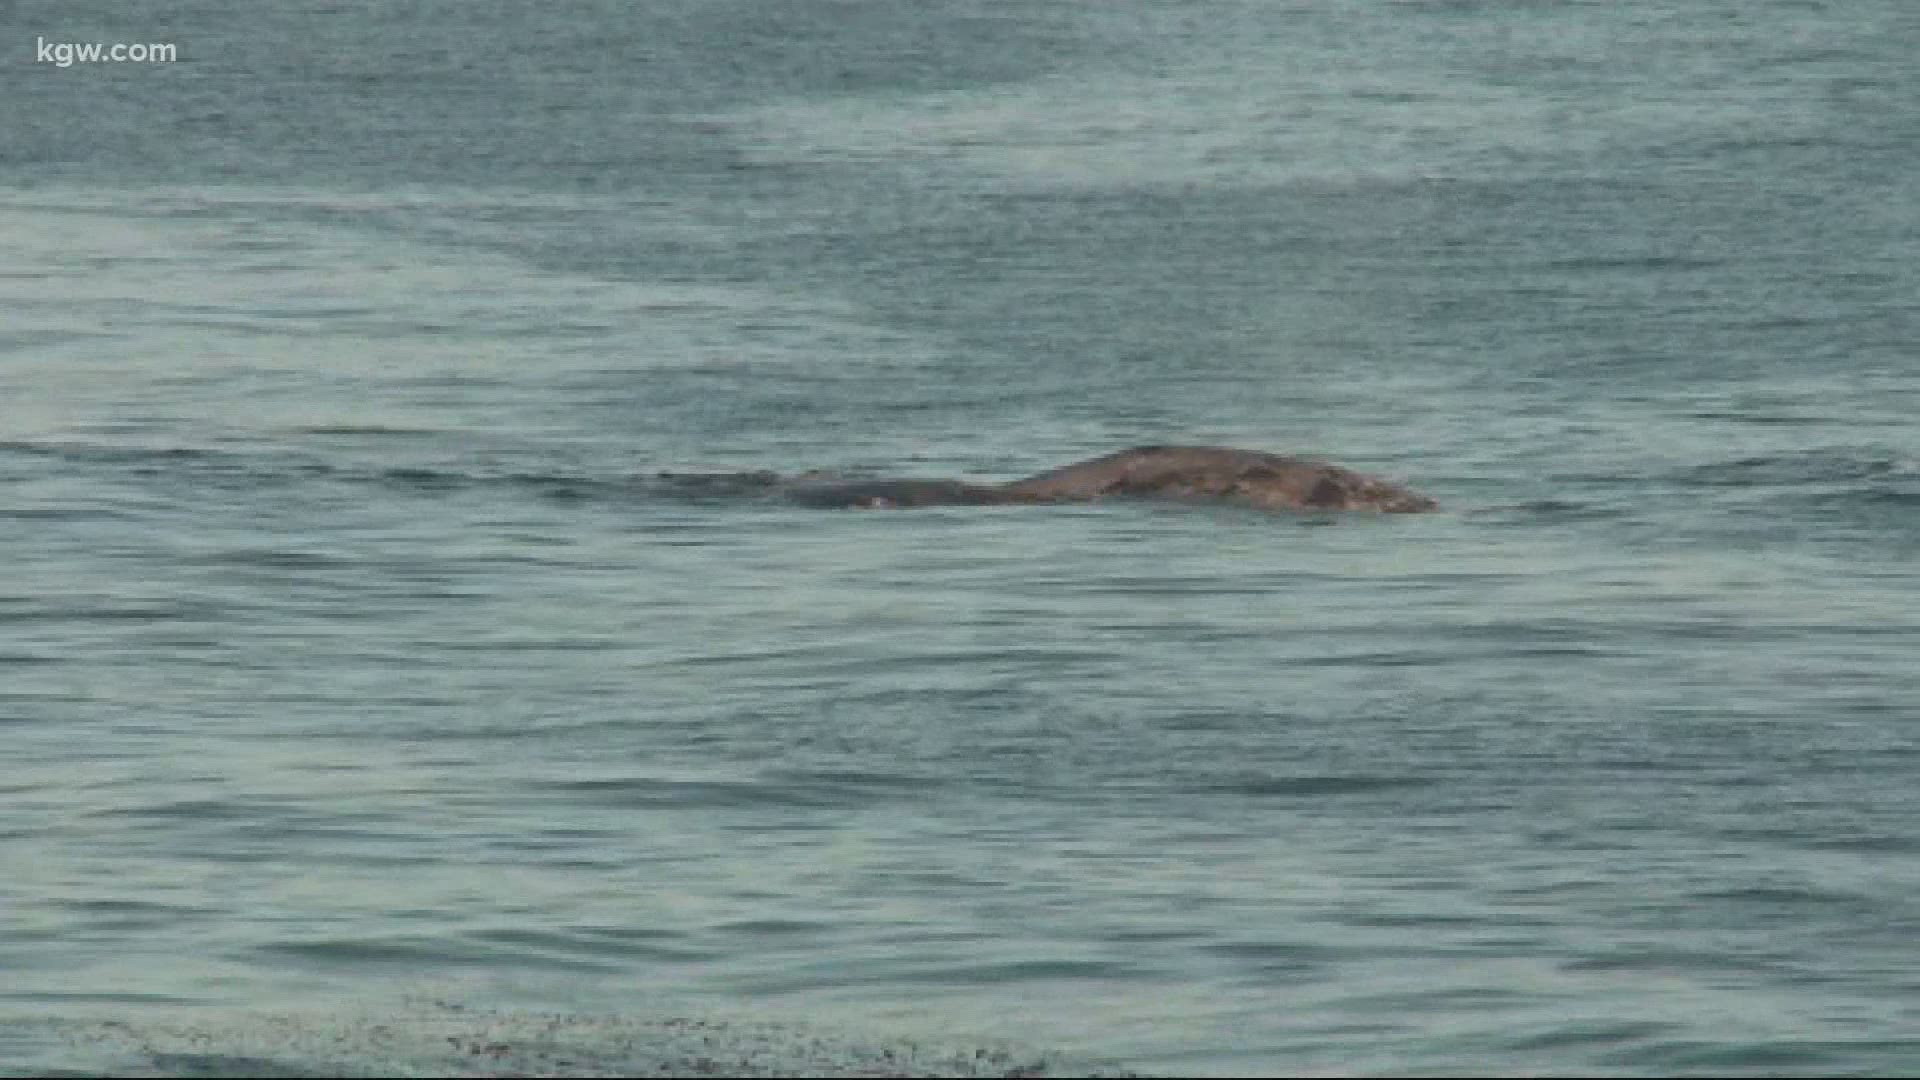 In the last 4 years, the West Coast has lost a quarter of its gray whale population. Keely Chalmers reports on what that mean’s for the animal’s future.